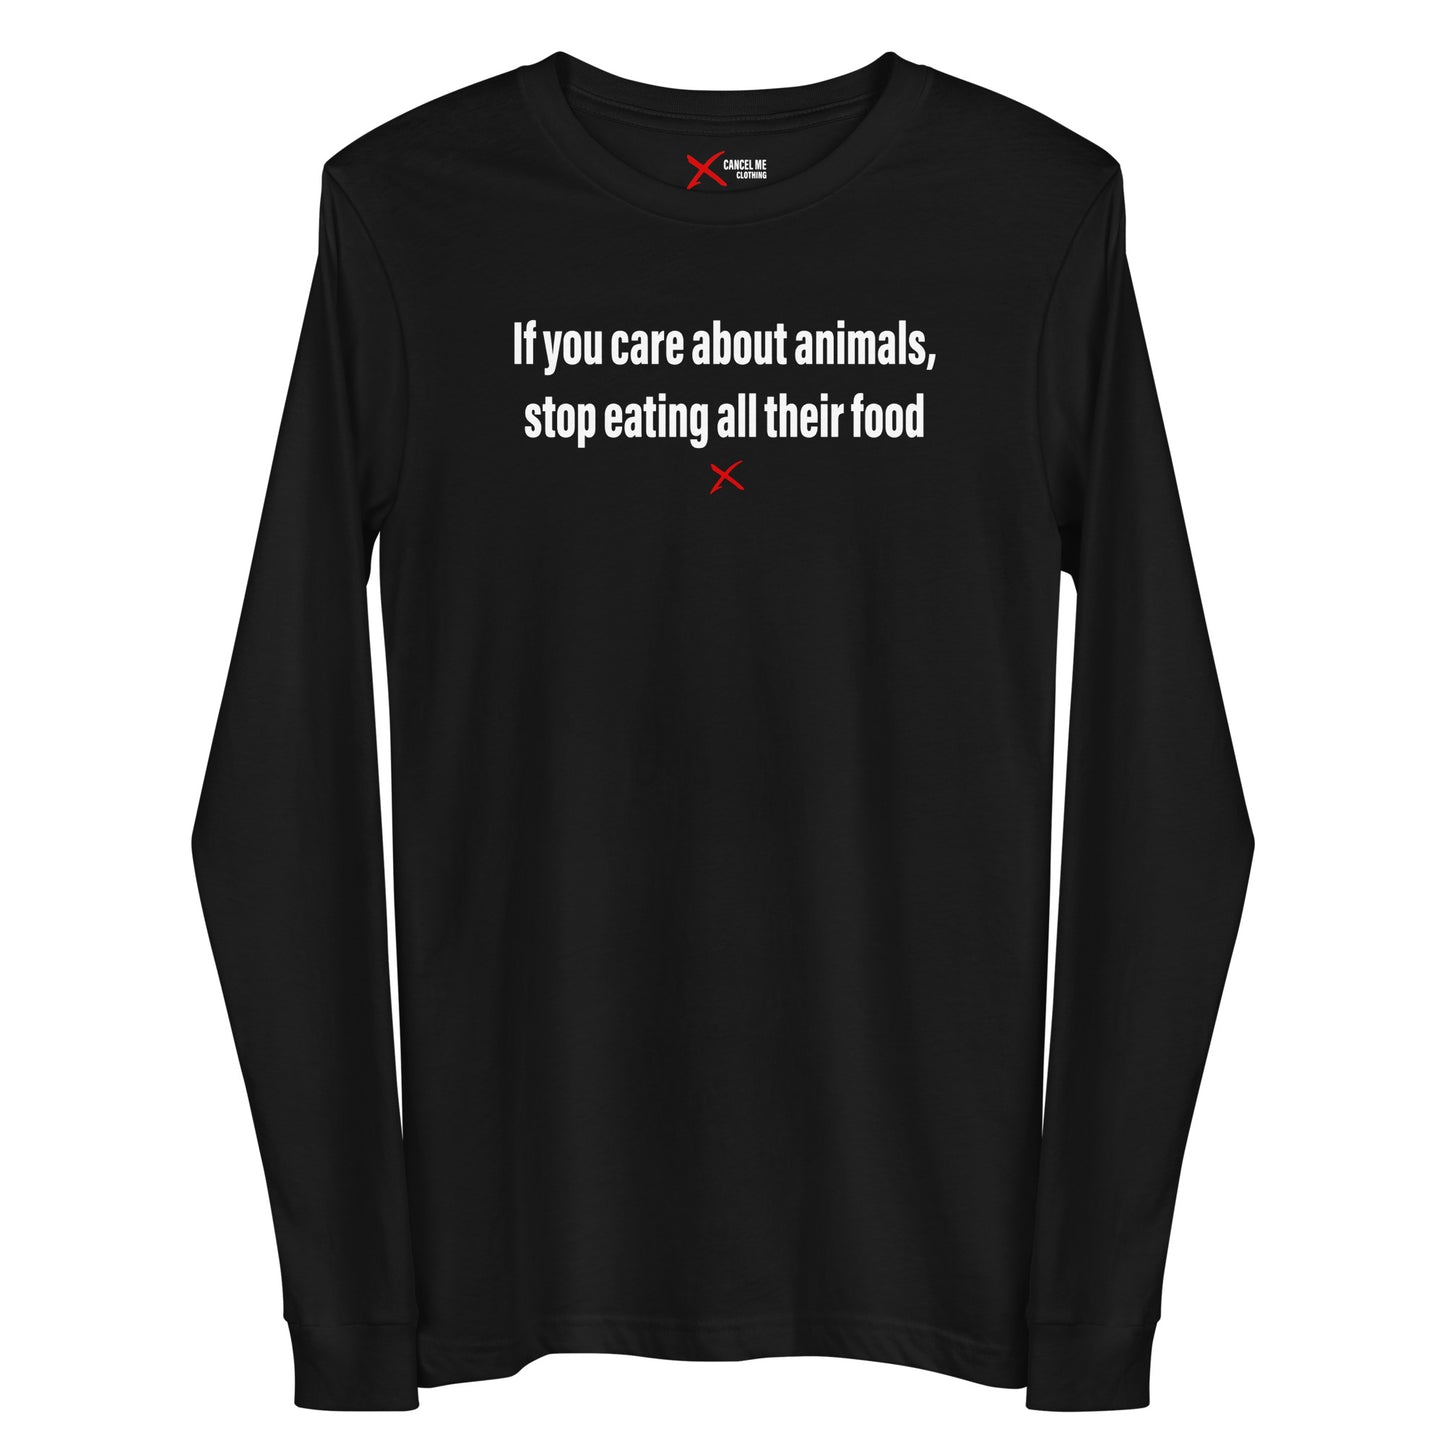 If you care about animals, stop eating all their food - Longsleeve